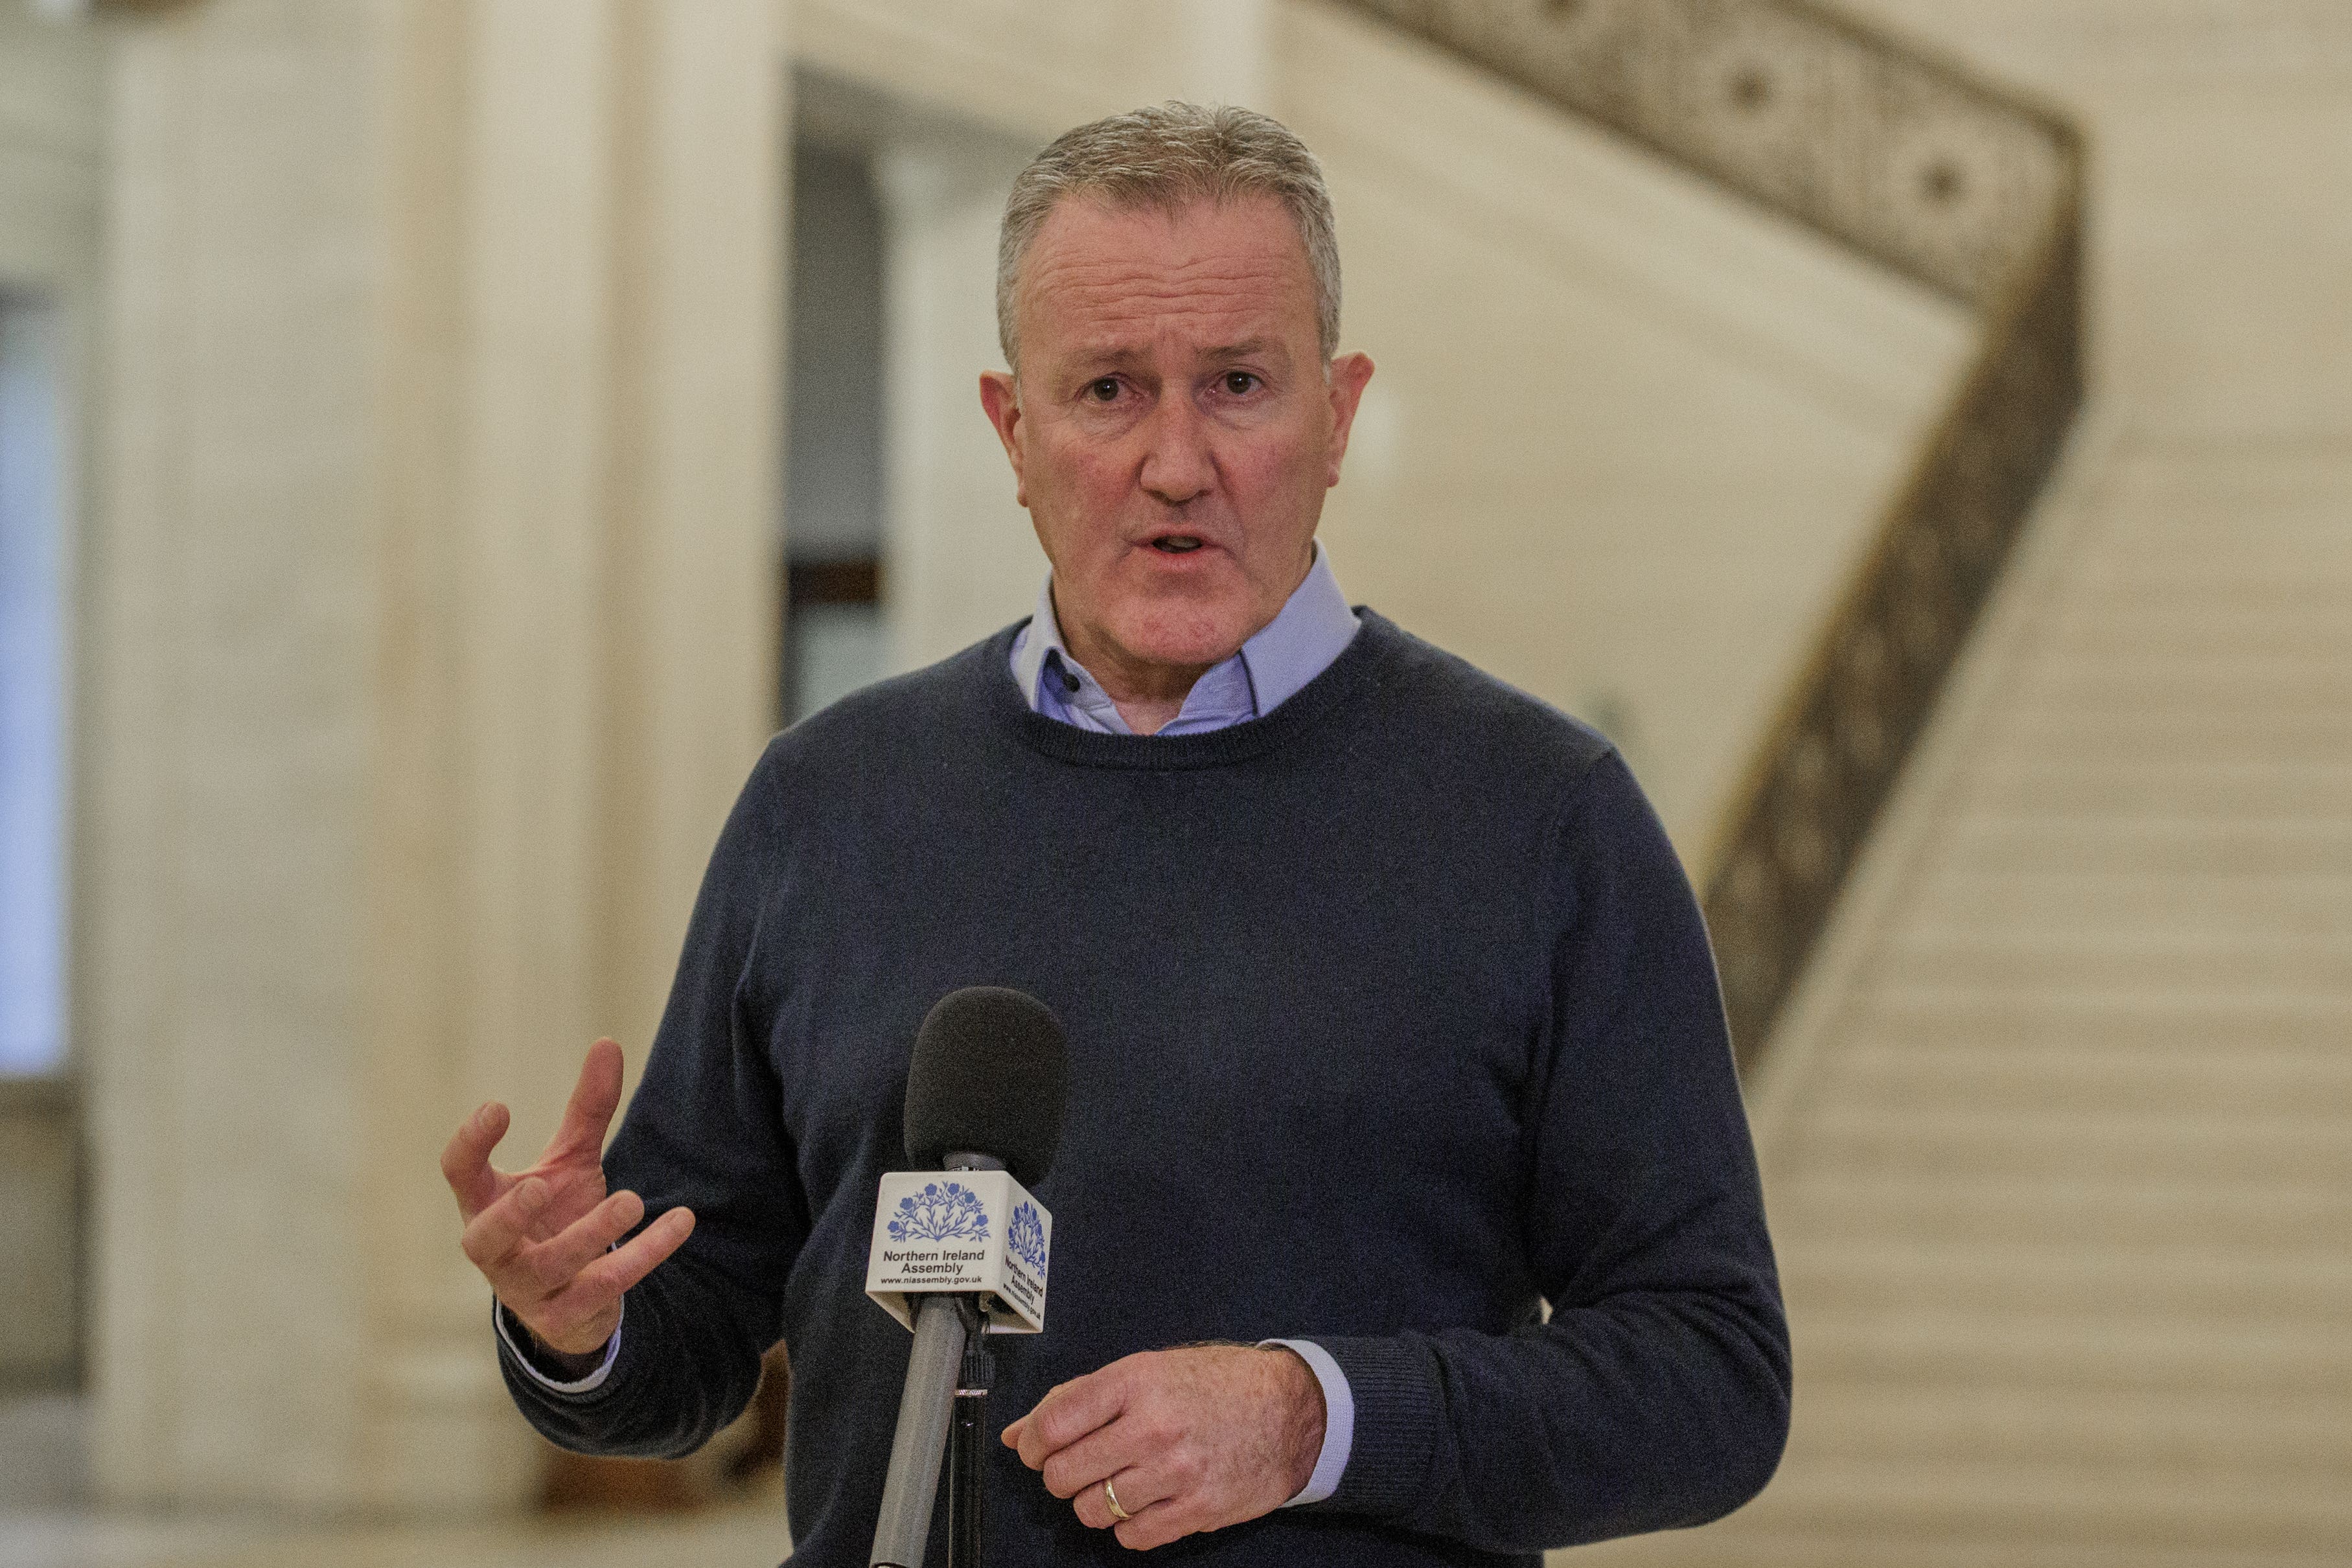 Sinn Fein MLA Conor Murphy speaking in the Great Hall of Parliament Buildings at Stormont calling on DUP leader Sir Jeffery Donaldson to say if he want share power or not (Liam McBurney/PA)